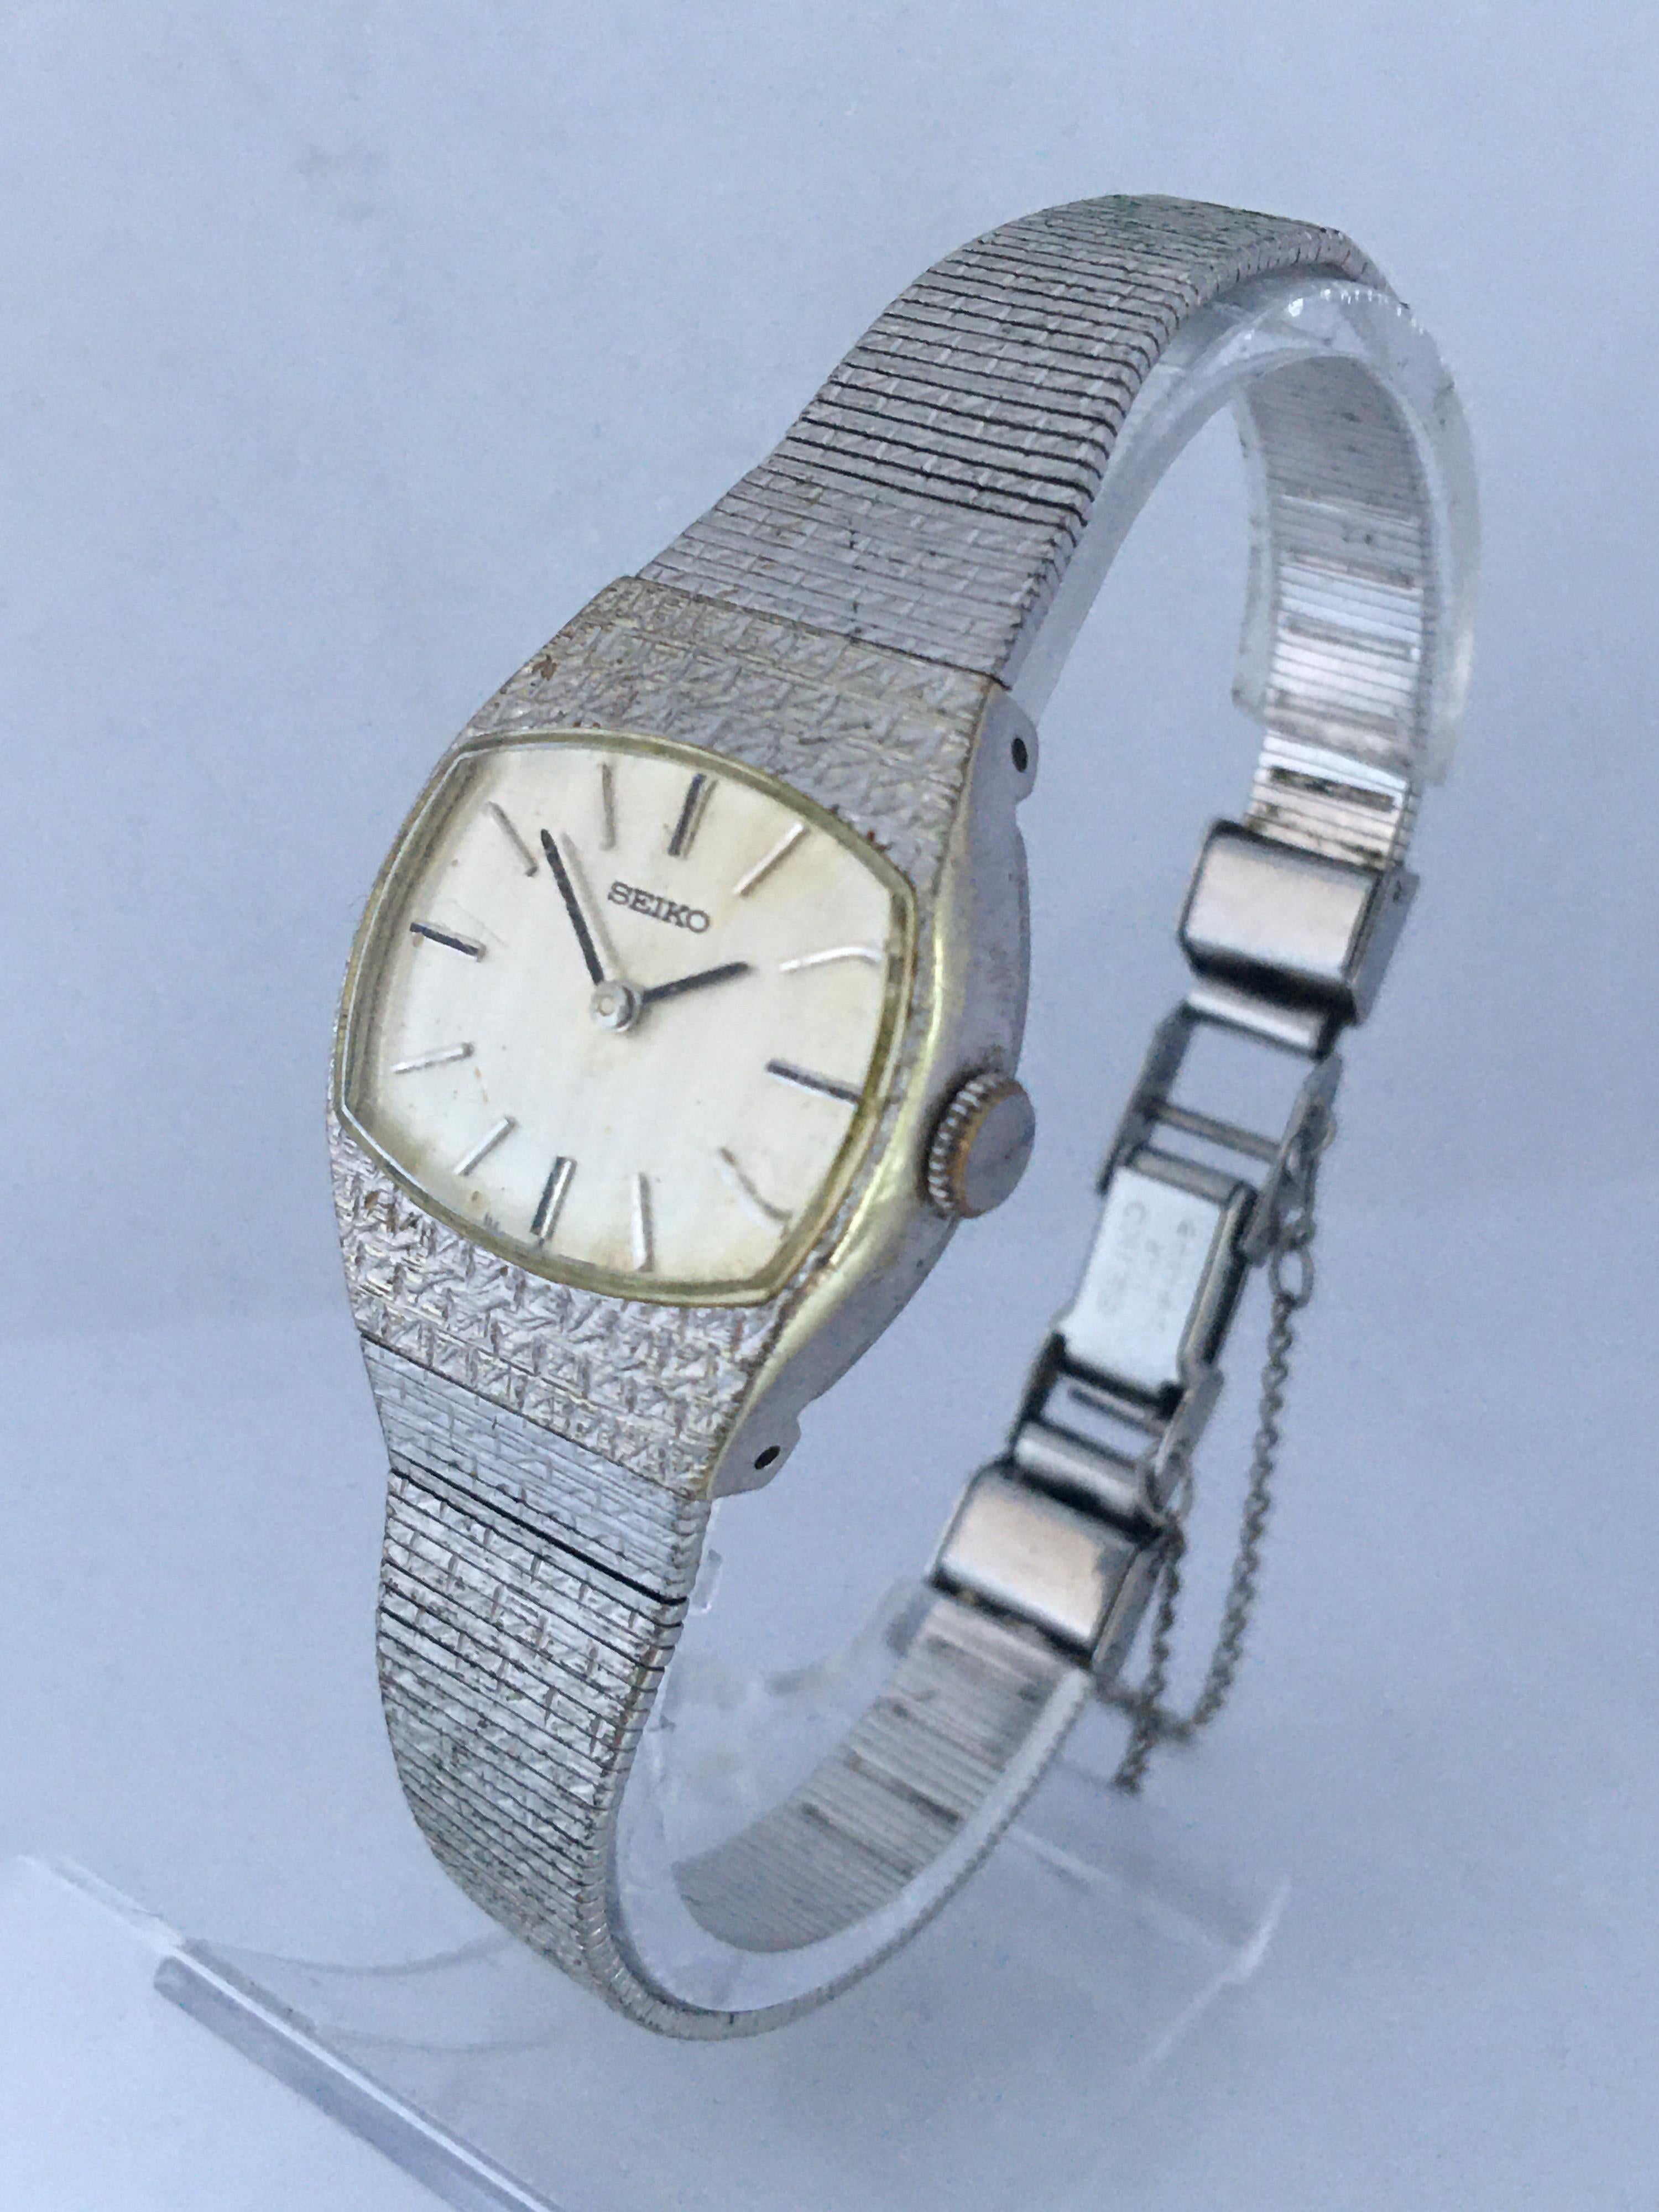 Ladies Seiko Watches - 6 For Sale on 1stDibs | old seiko ladies watches, seiko  women's watches vintage, vintage ladies seiko quartz watch